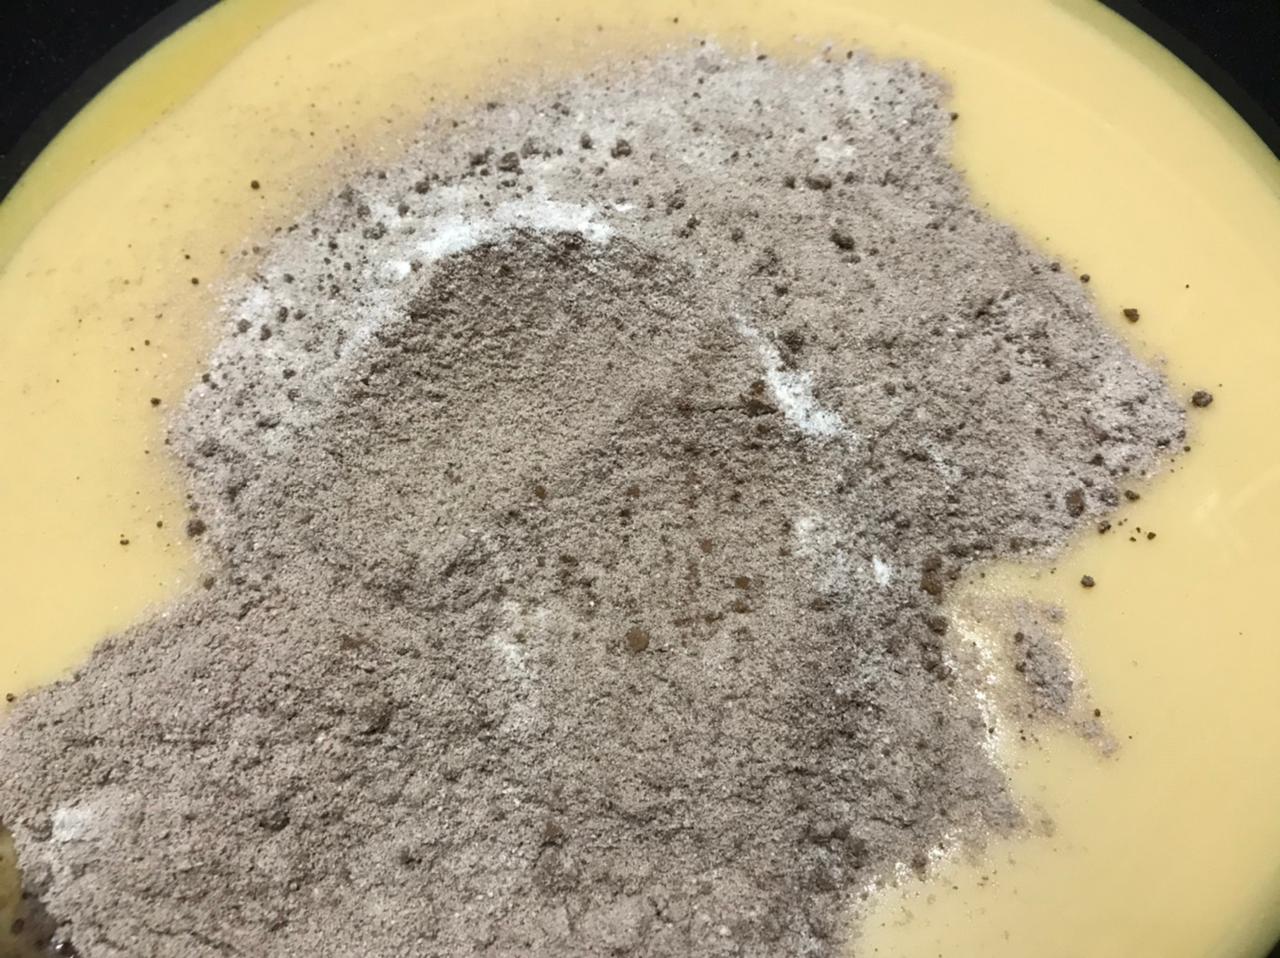 Adding the cocoa powder and milk powder mix to condensed milk in a pan